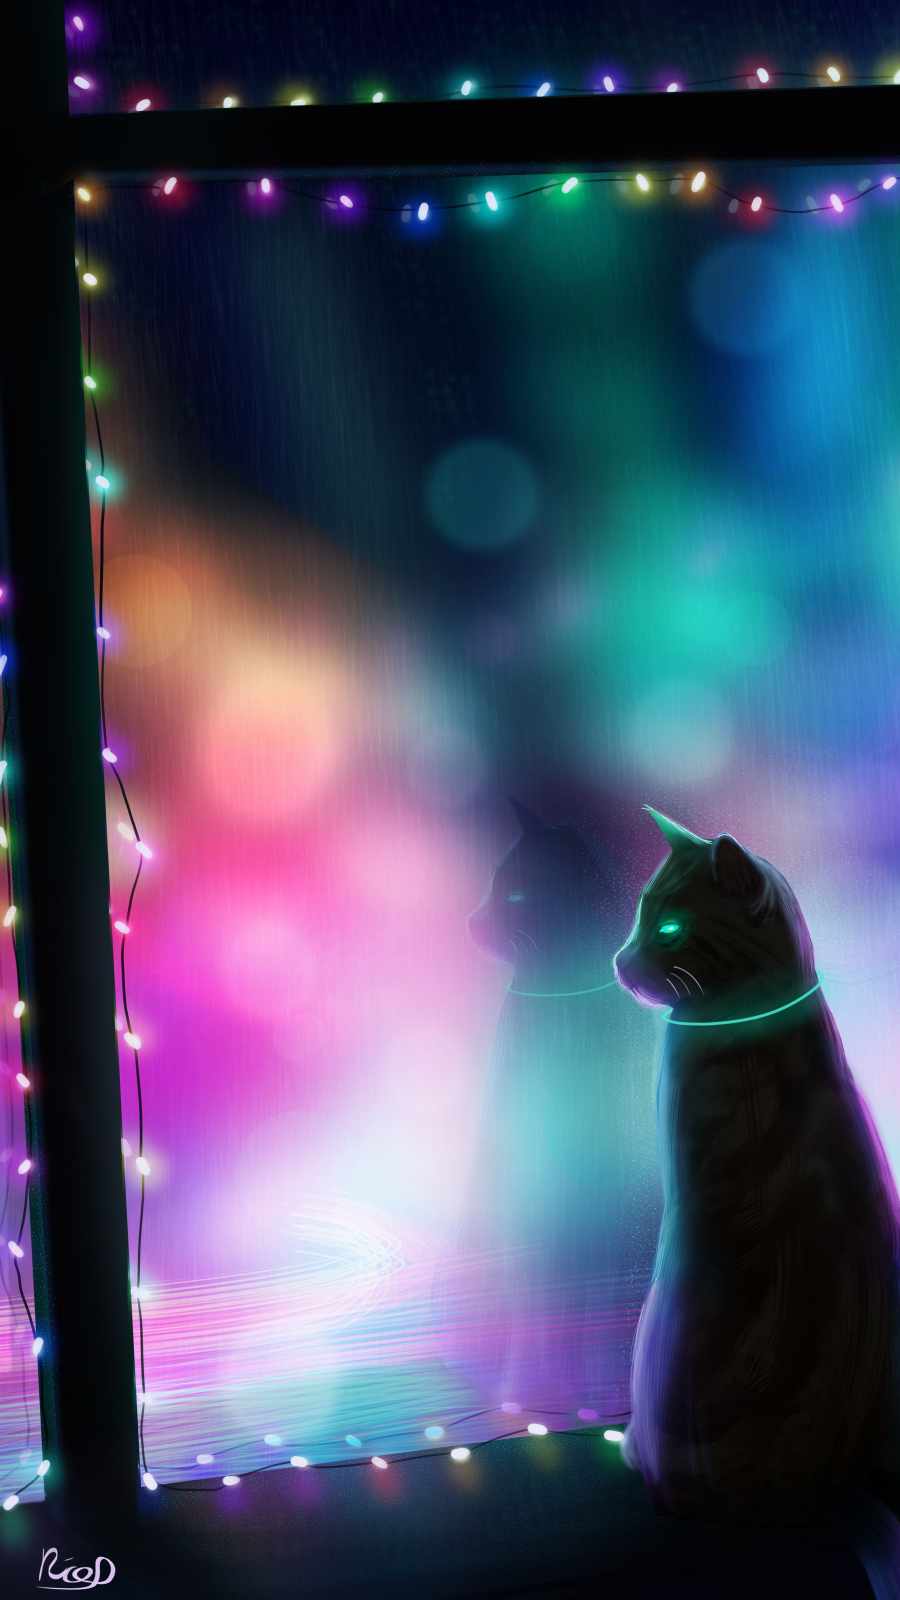 Cat and Lights iPhone Wallpaper